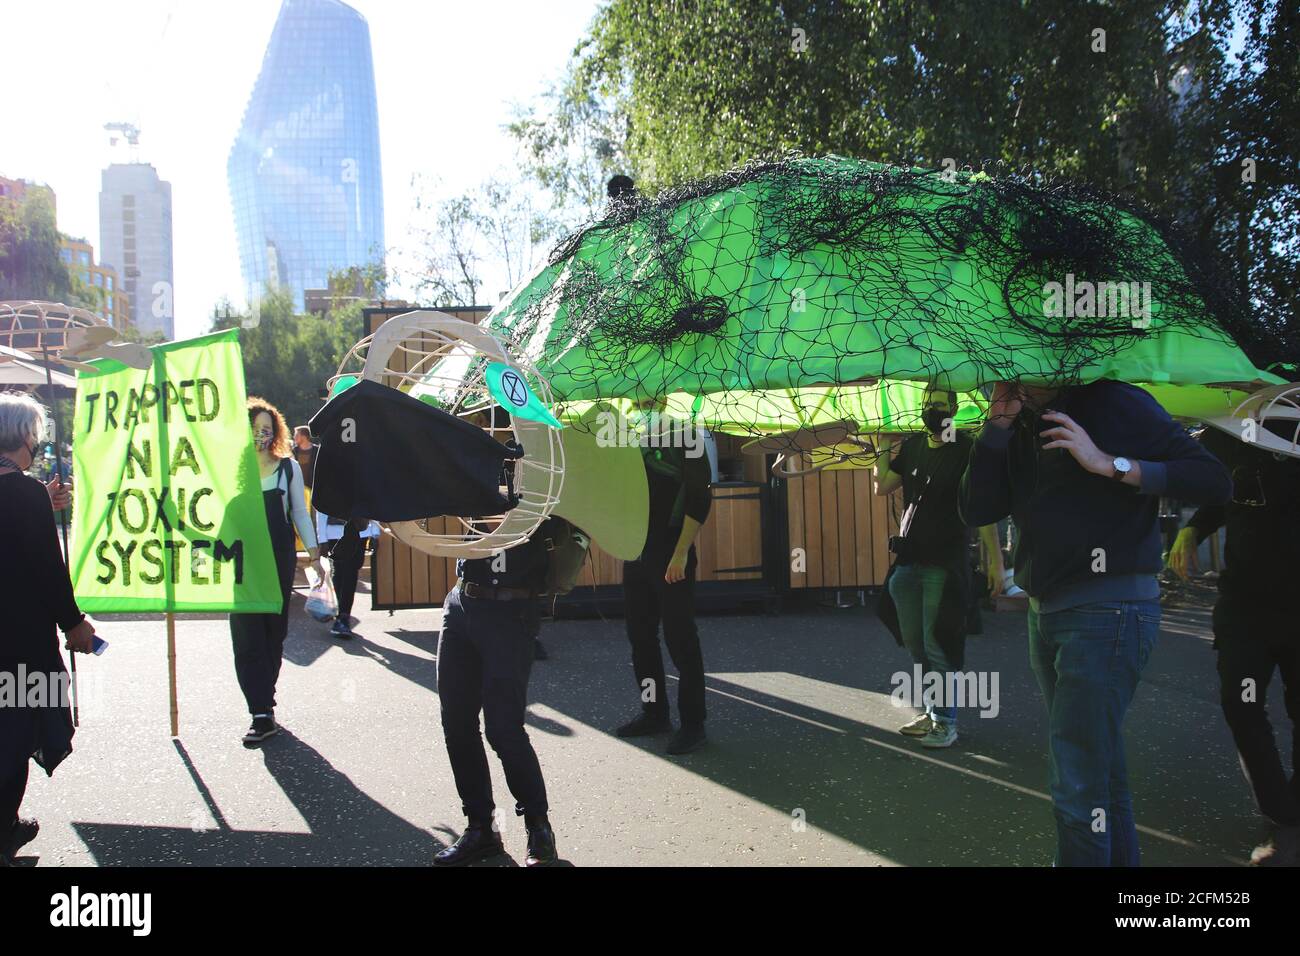 London, UK. 06th Sep, 2020. Extinction Rebellion protestors march from Parliament Square to Tate Modern to highlight the dangers to marine life from global warming and climate change, 6th September 2020. A giant sea turtle is carried by protestors with a banner saying trapped in a toxic system Credit: Denise Laura Baker/Alamy Live News Stock Photo